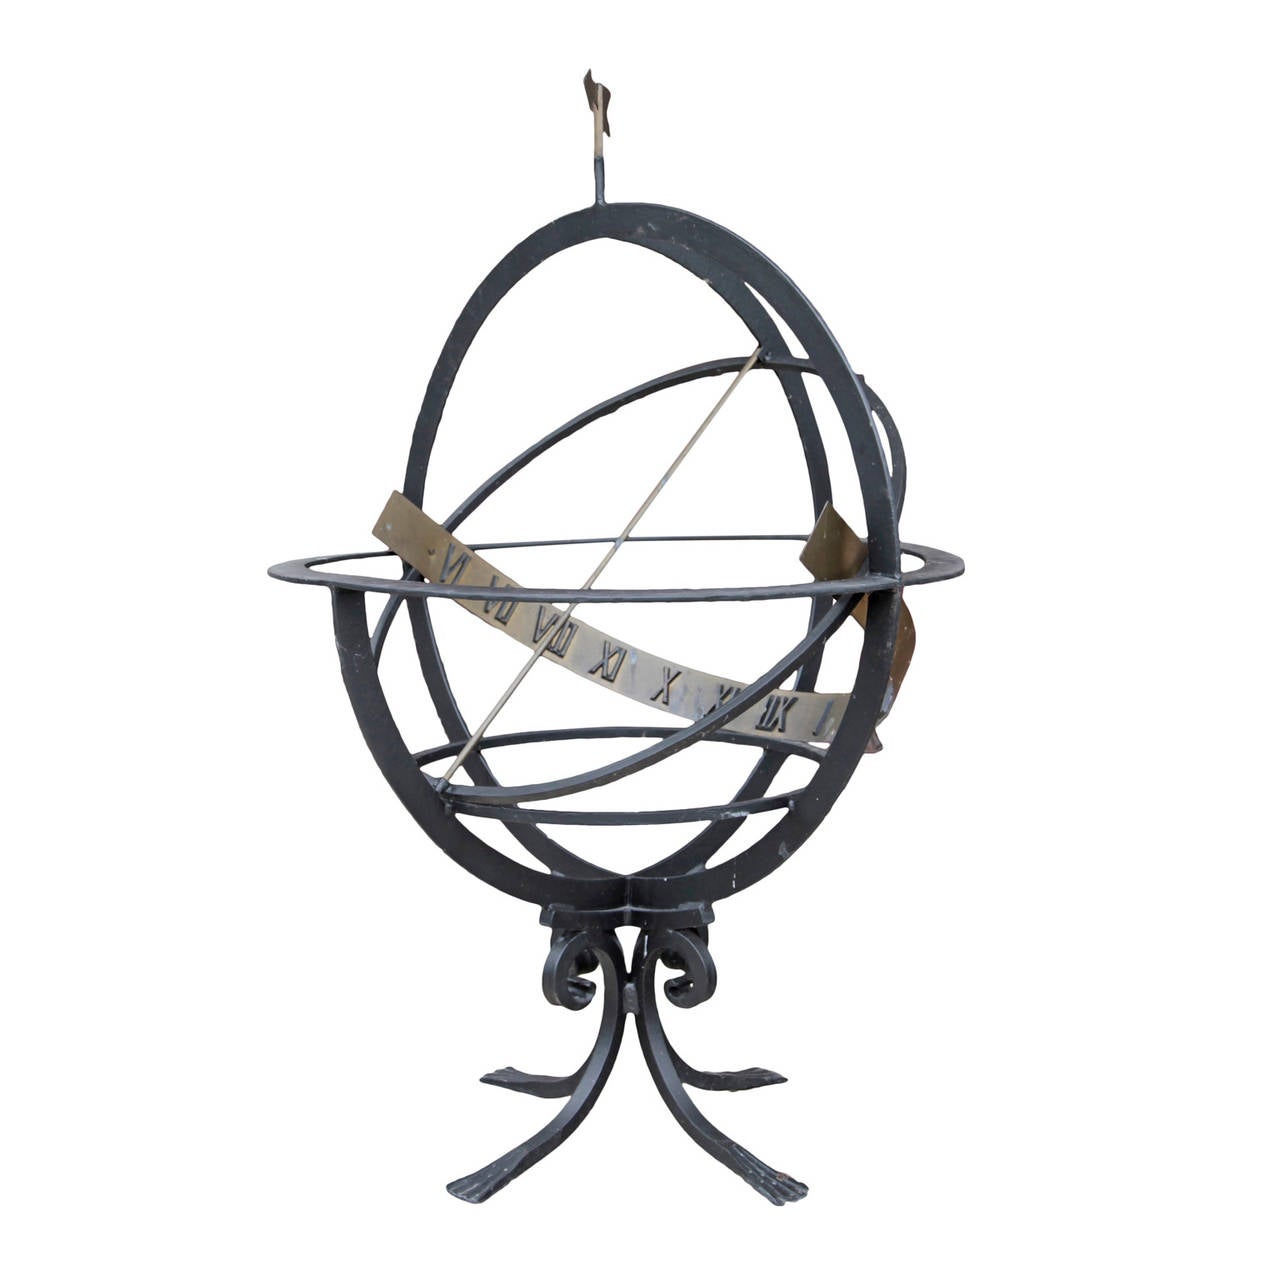 The sundial is made out of wrought iron and shaped like a globe. It stands on four bent legs and has several iron rings in the same diameter to determine the time.